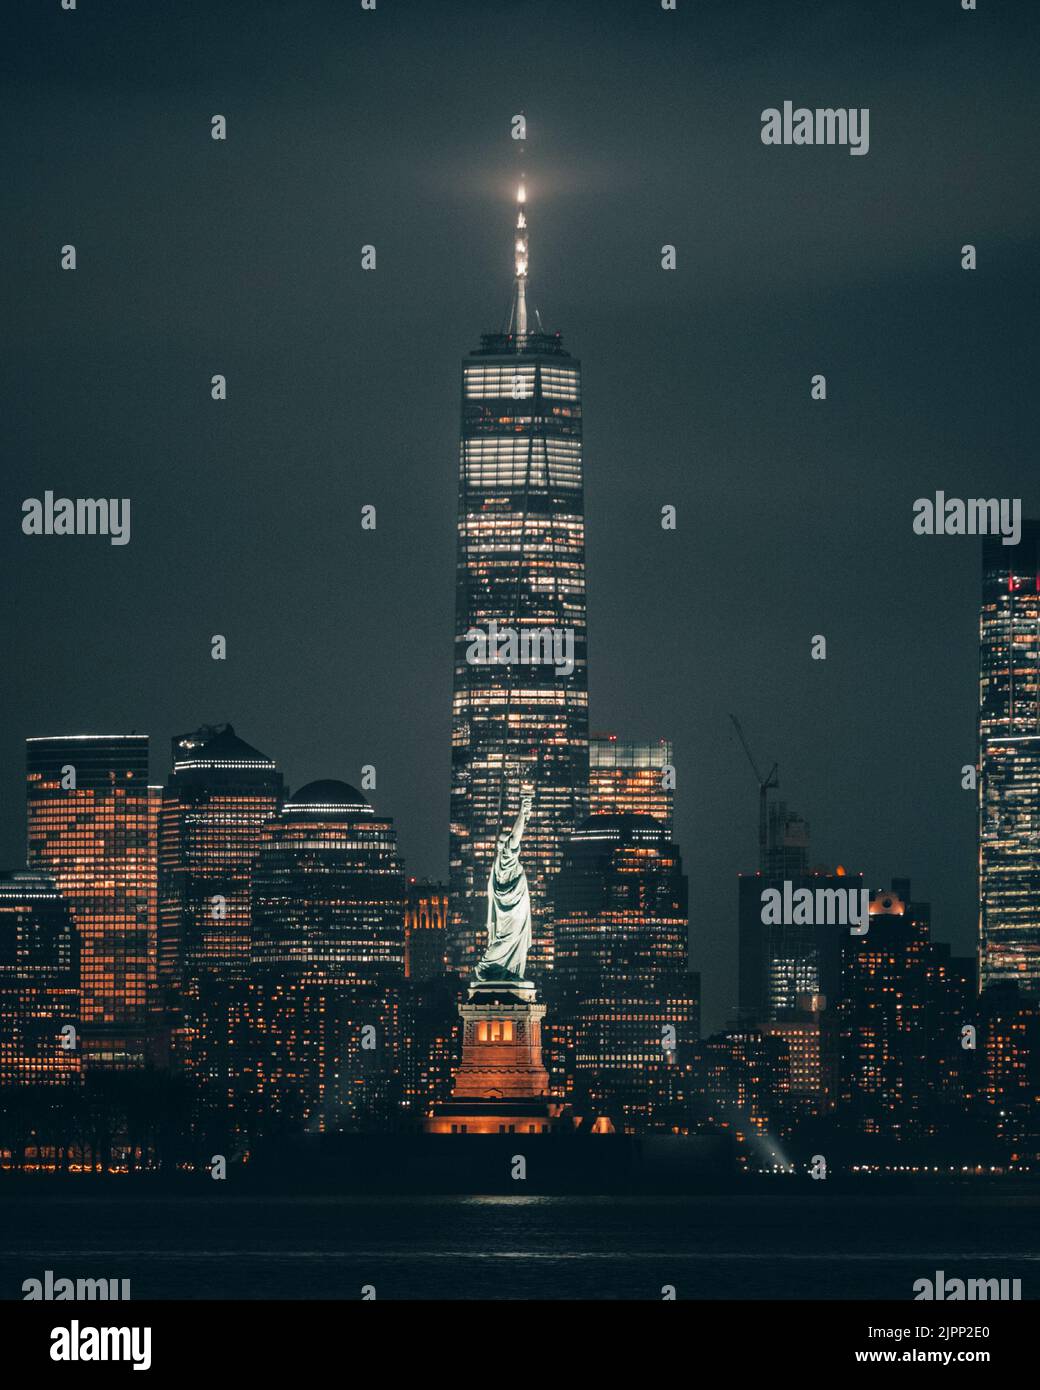 A vertical shot of the Statue of Liberty and skyscrapers at night in New York, United States Stock Photo